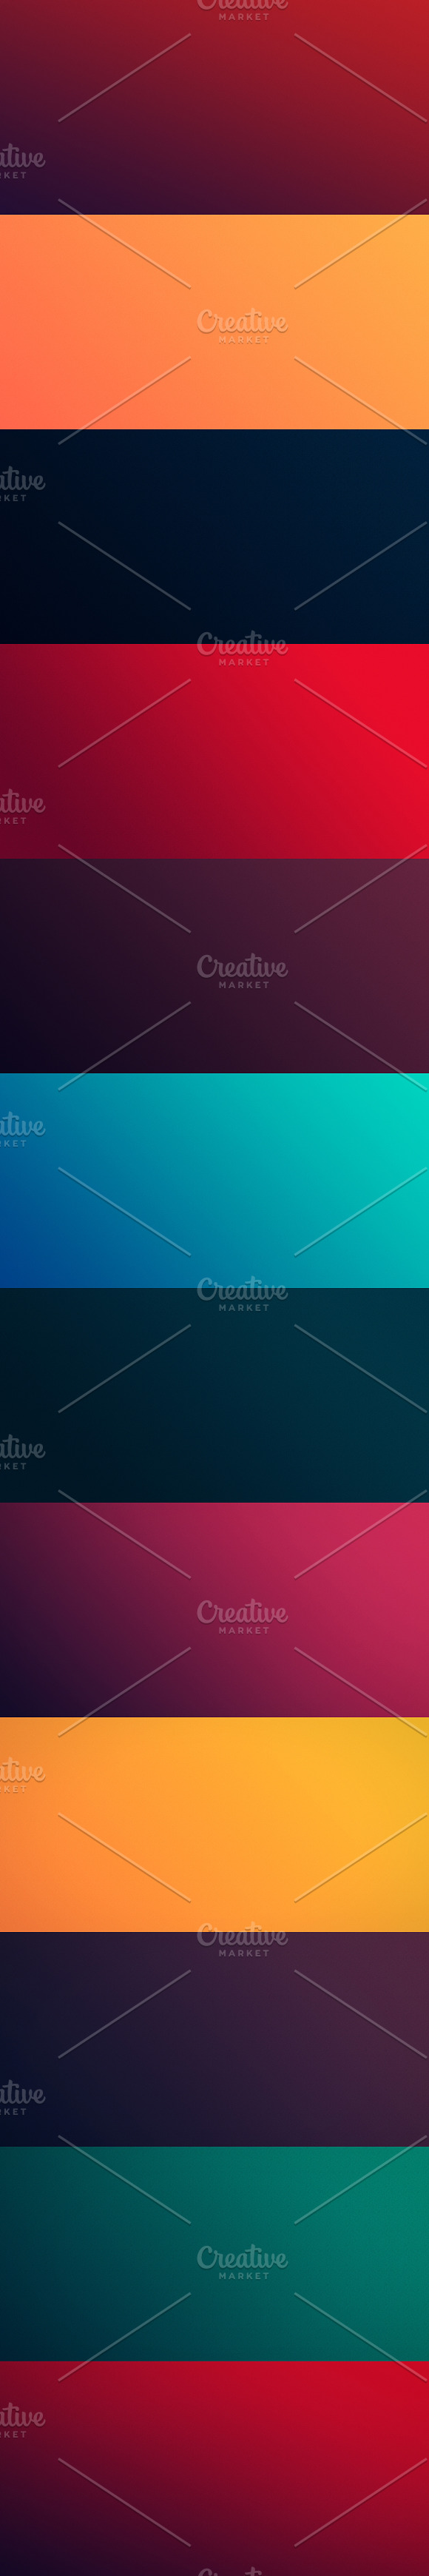 12 Gradients in Photoshop Gradients - product preview 2